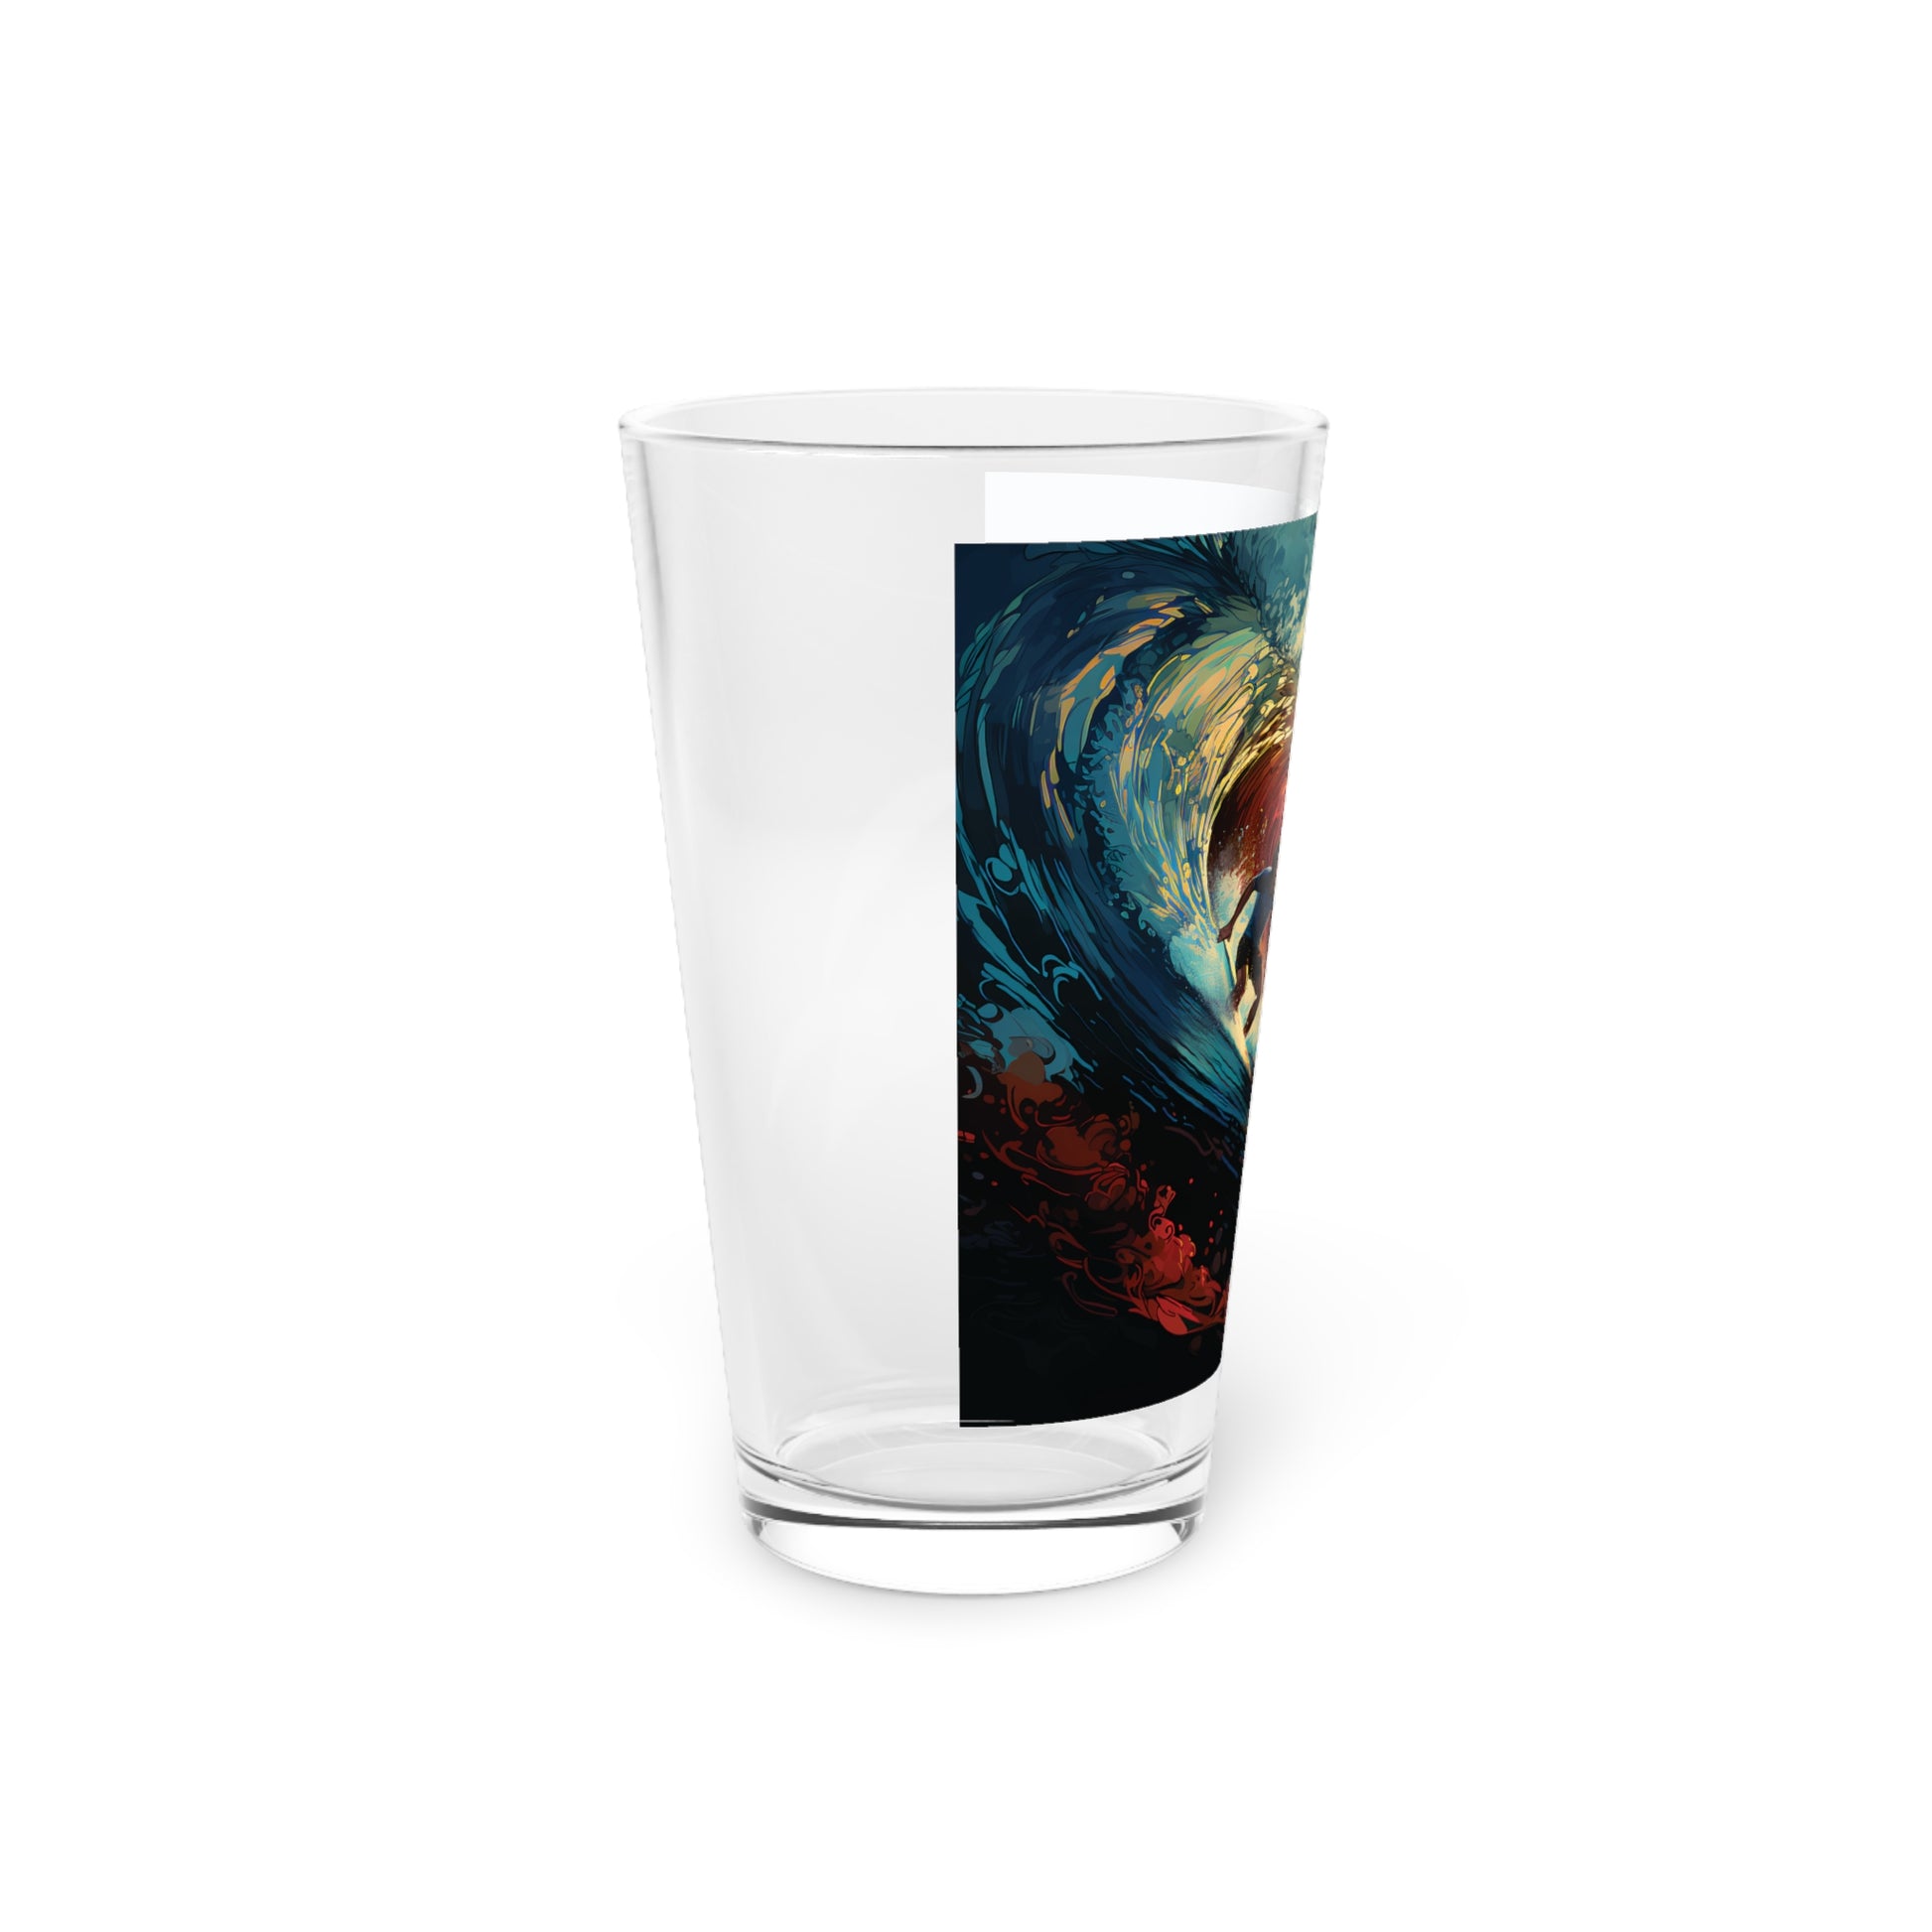 Surfing Color Waves Pint Glass: where art meets functionality. Waves Design #019 encapsulates the joy of riding waves in a vivid, eye-catching design.